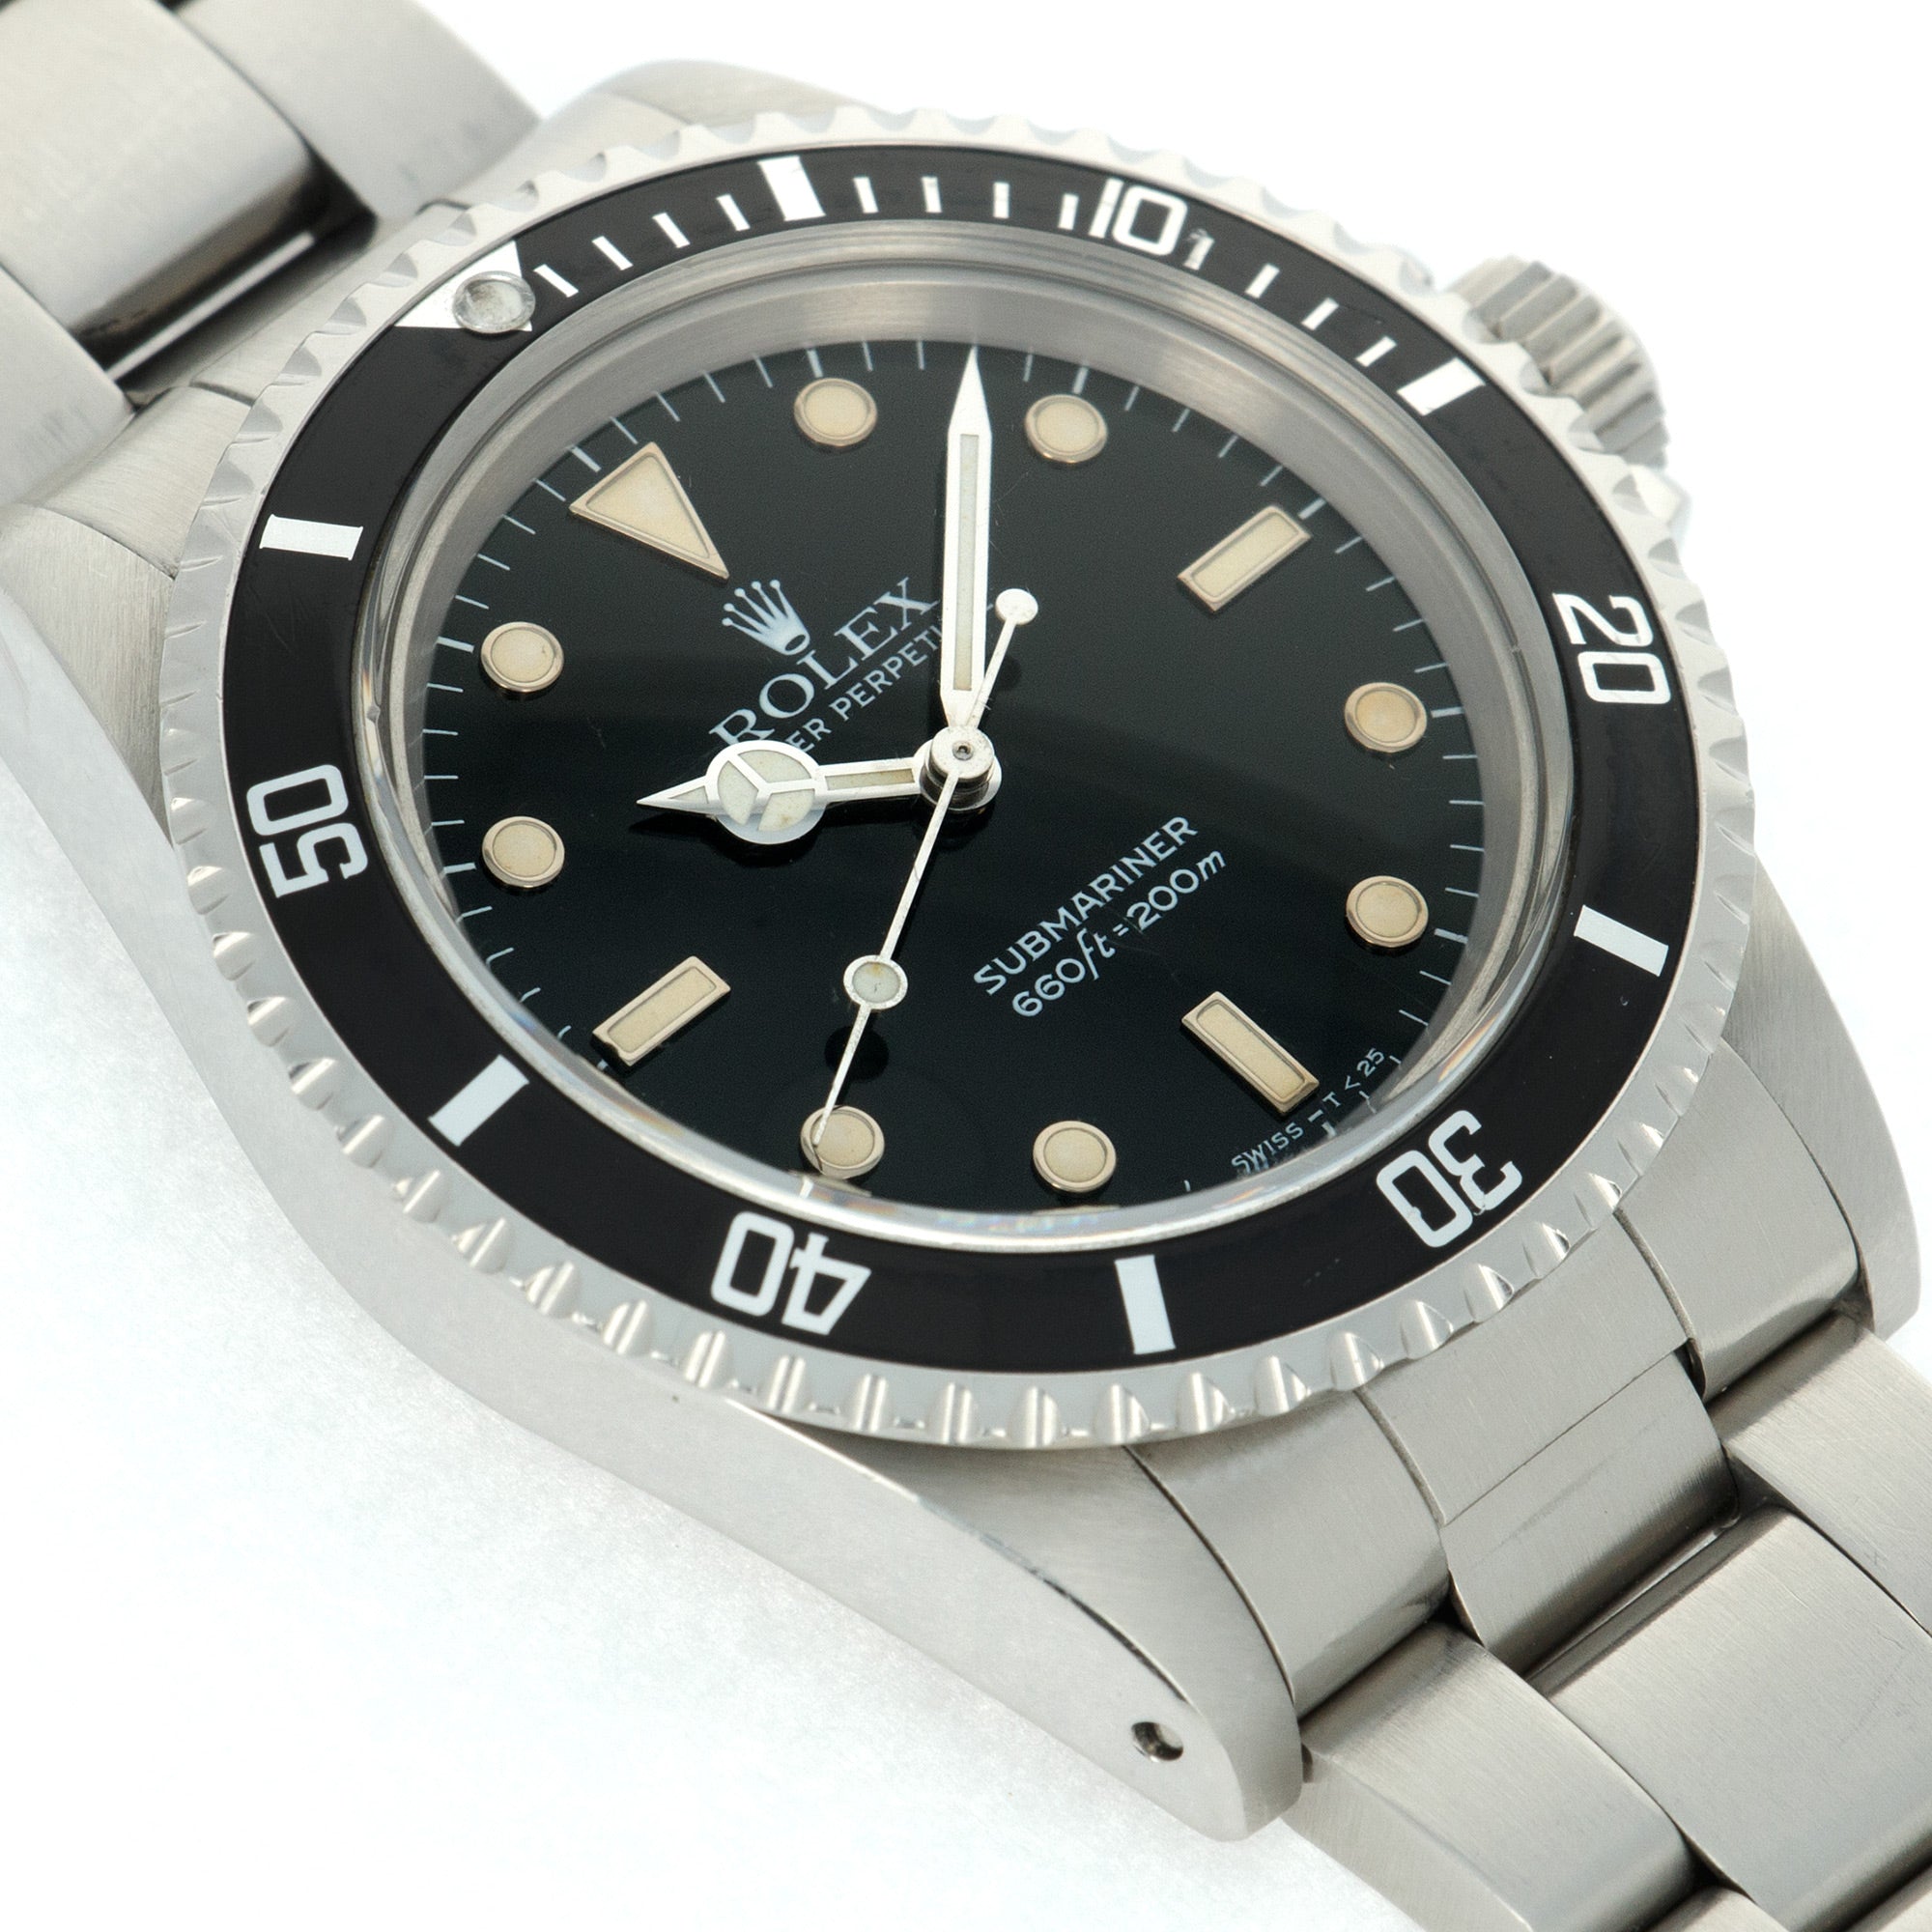 Rolex Submariner Ref. 5513 with Original Paper and Hang Tag